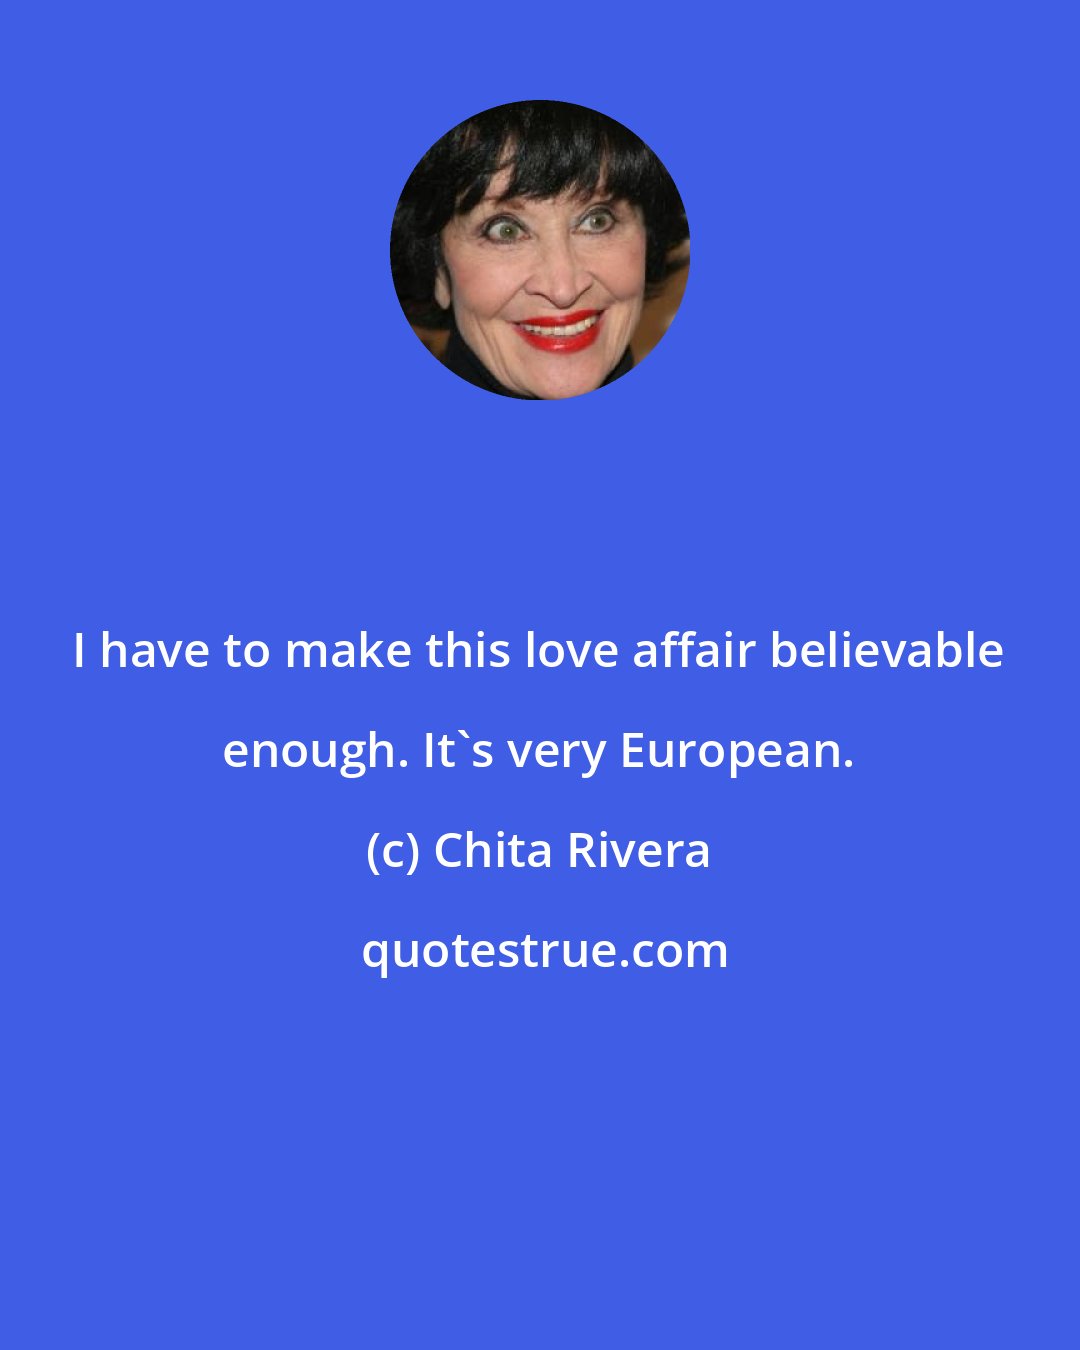 Chita Rivera: I have to make this love affair believable enough. It's very European.